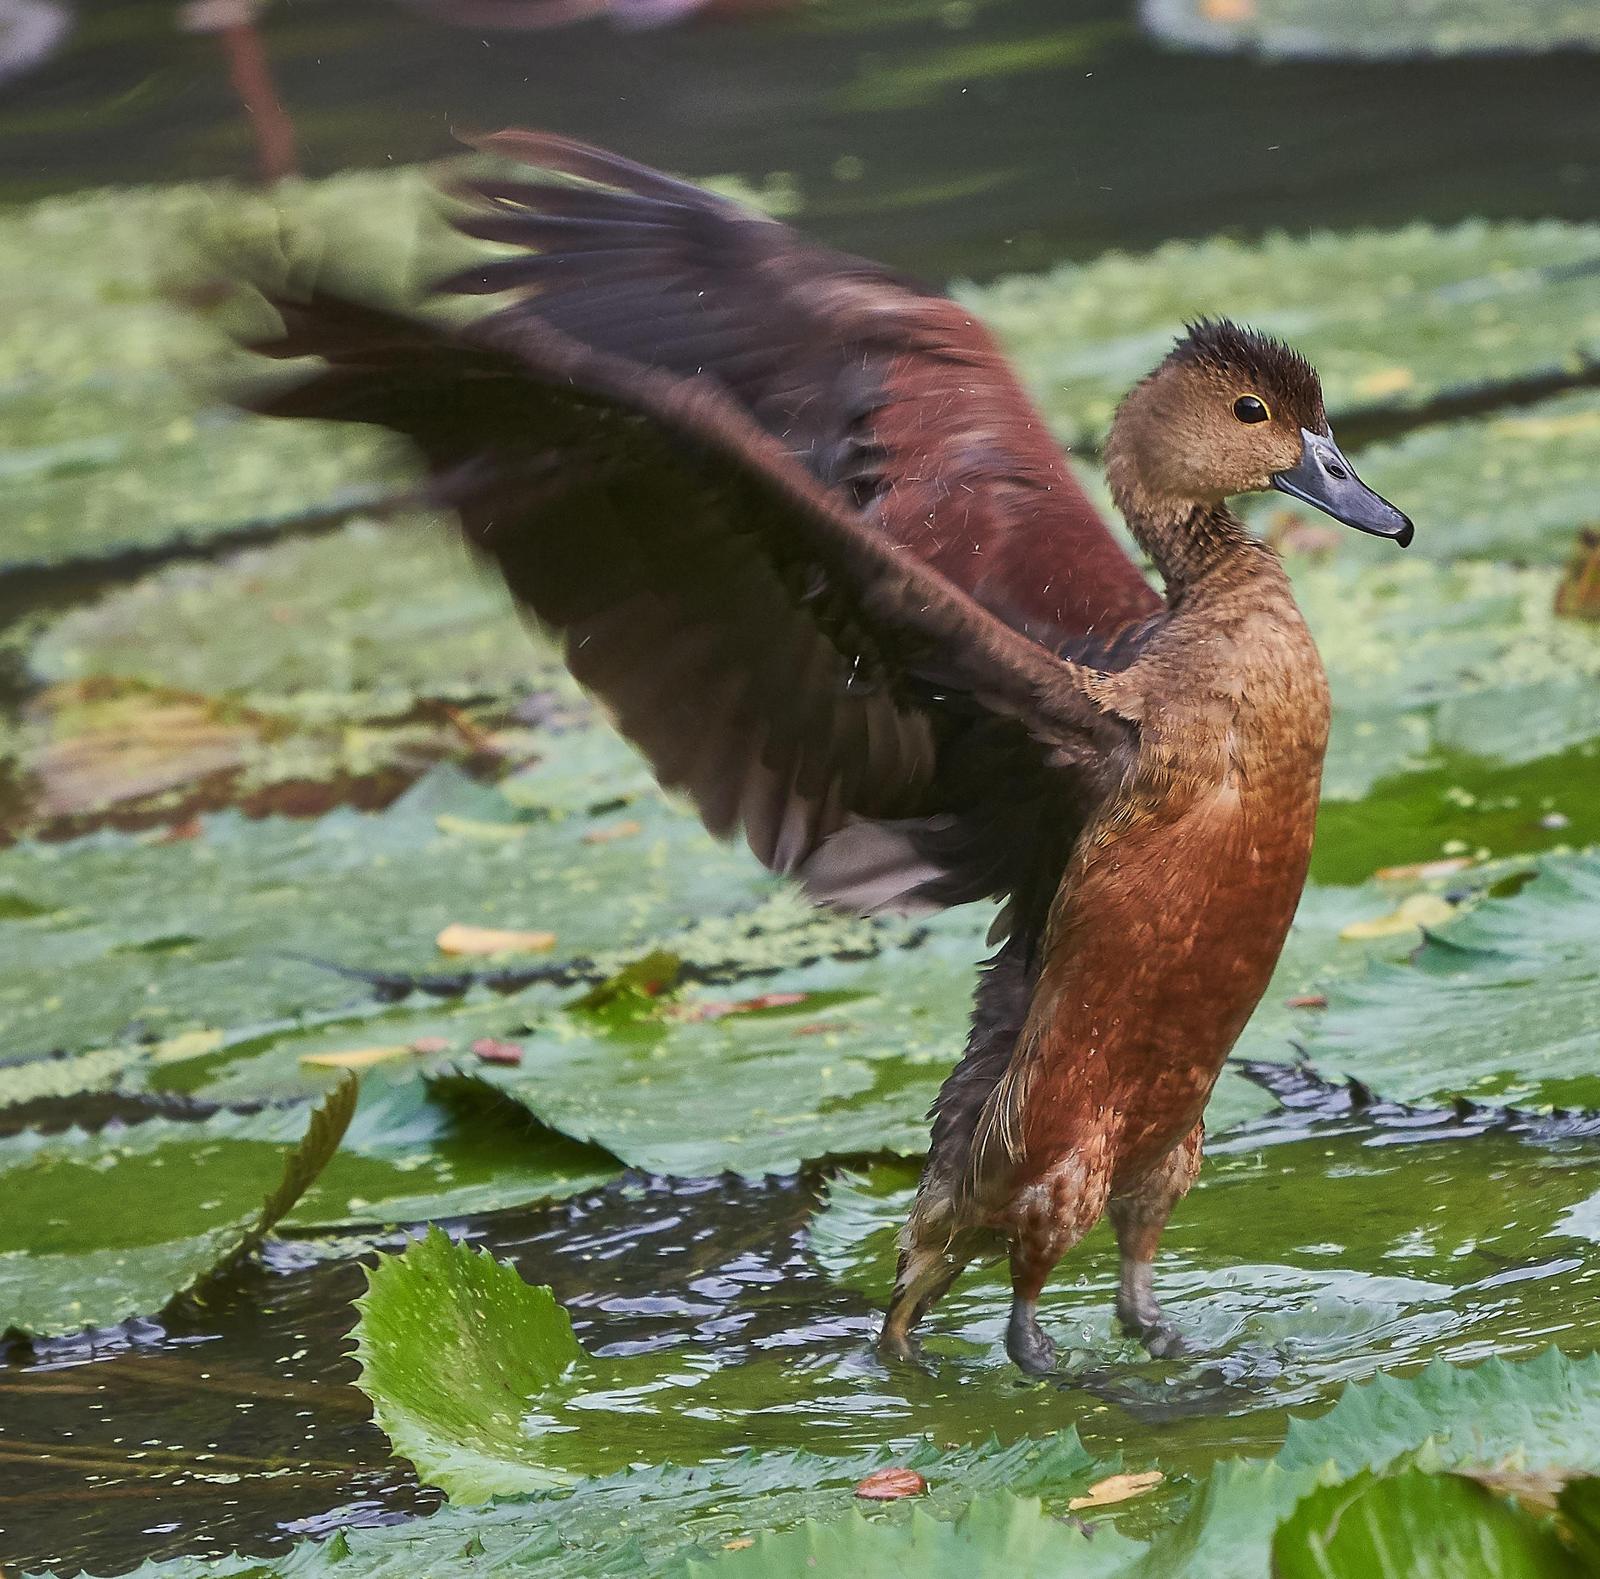 Lesser Whistling-Duck Photo by Steven Cheong